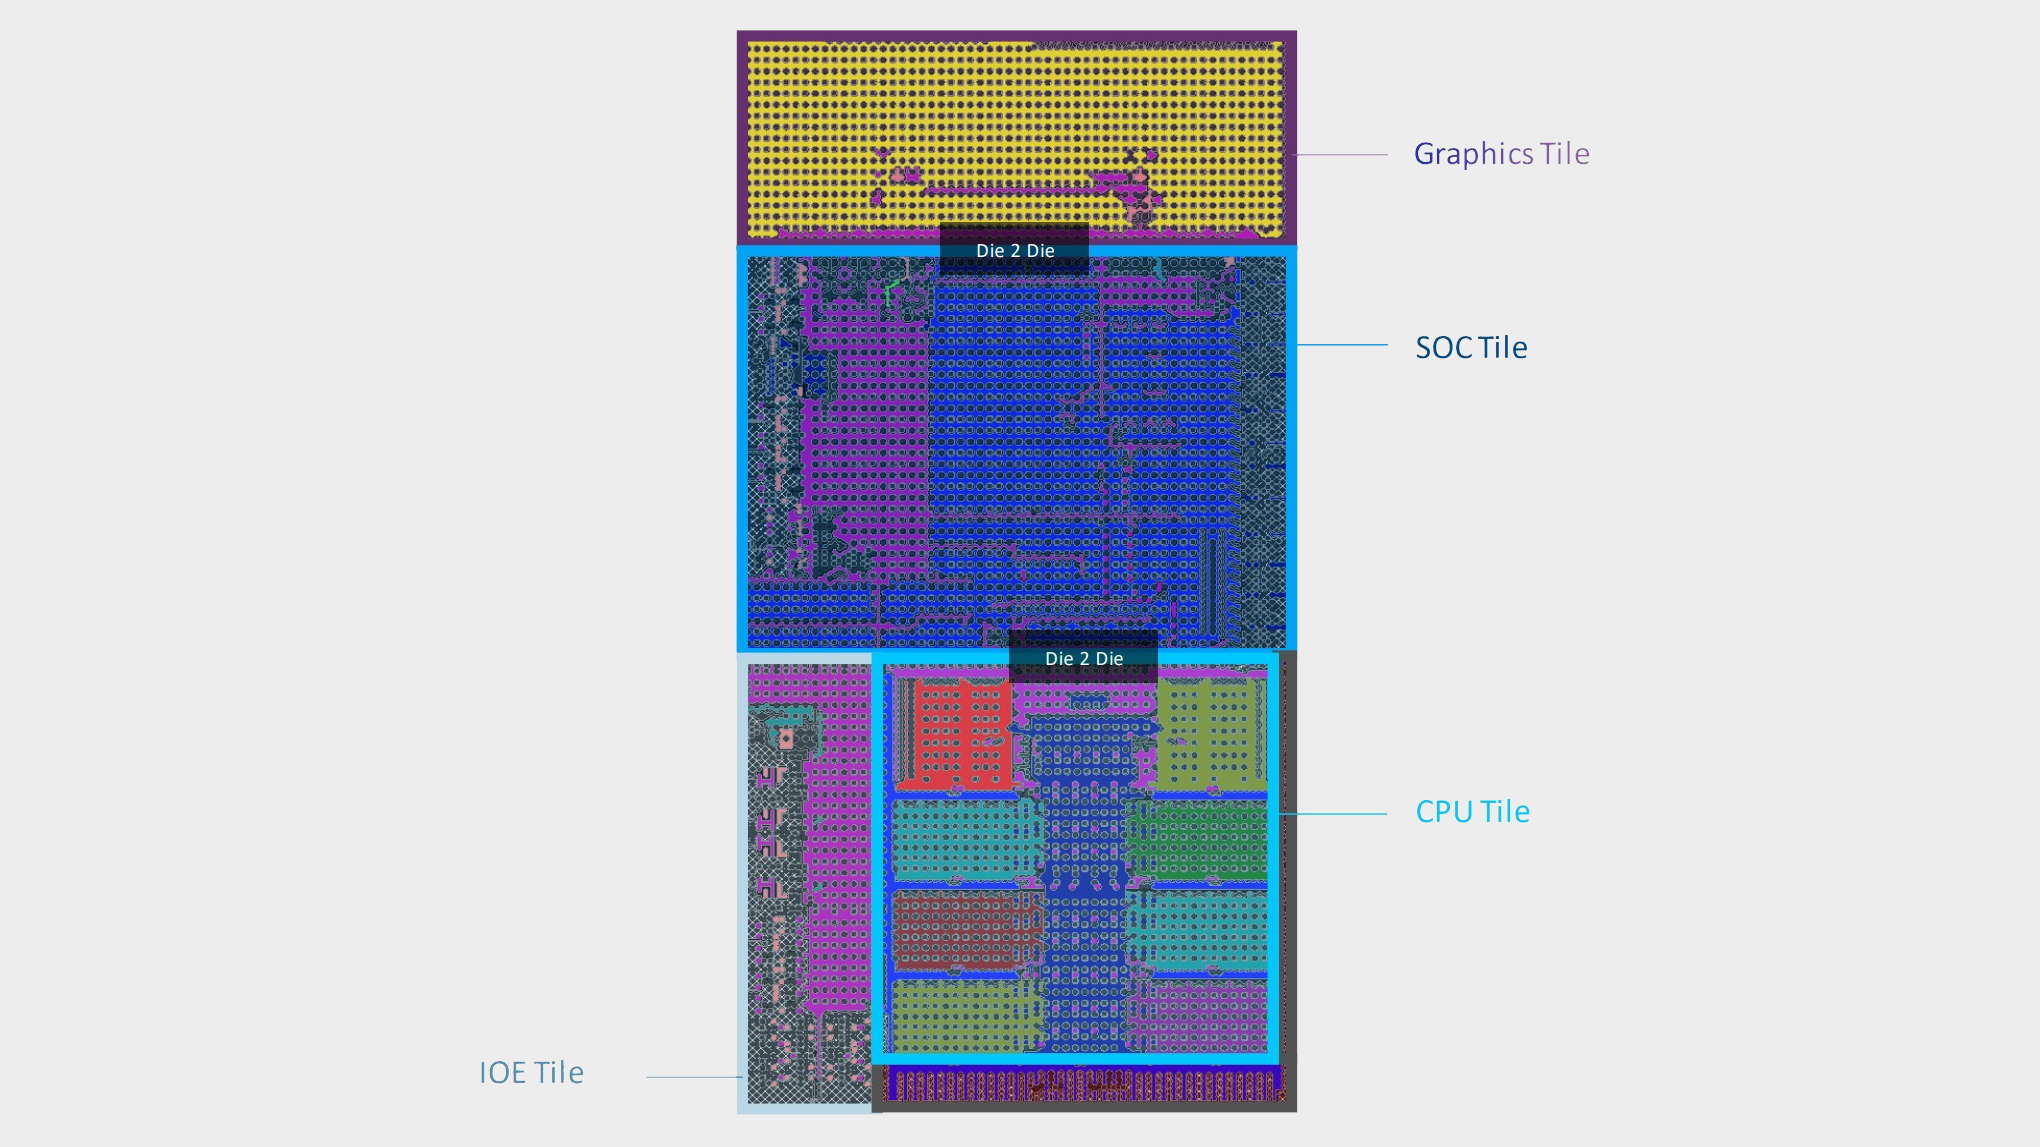 The Intel Meteor Lake explainer: allow me to clear up any confusion